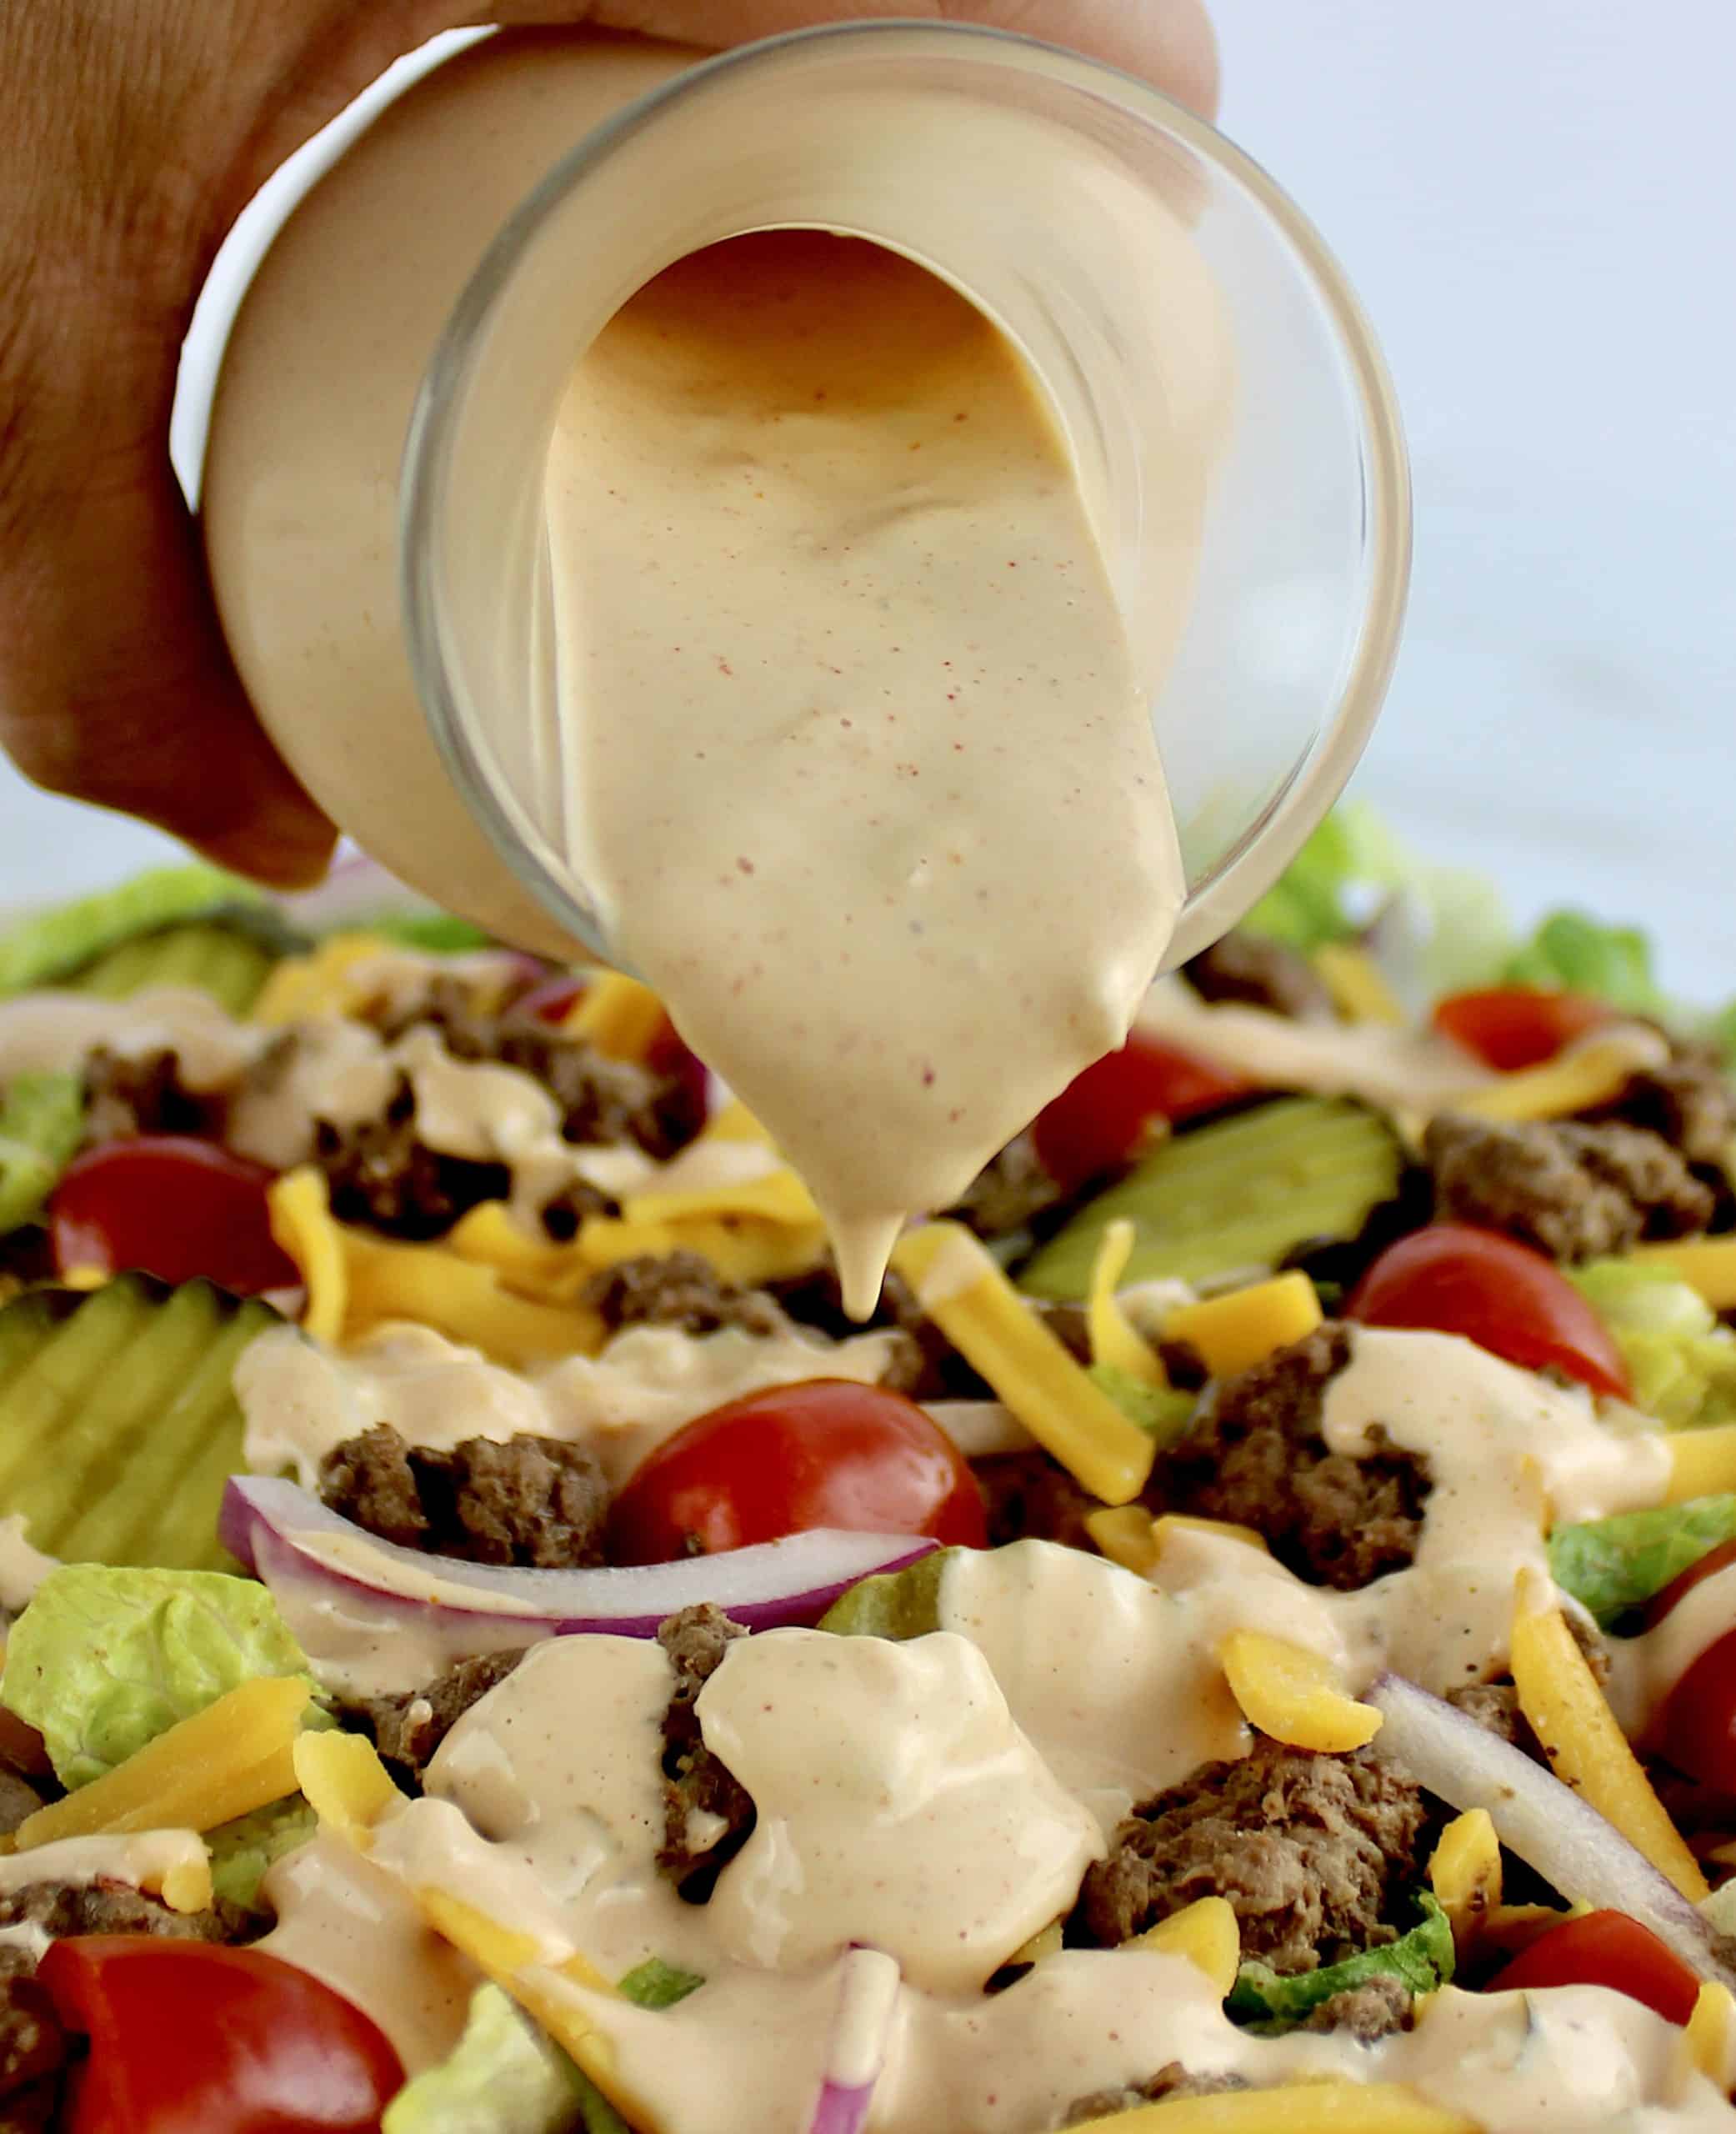 thousand island dressing being poured over Big Mac Cheeseburger Salad